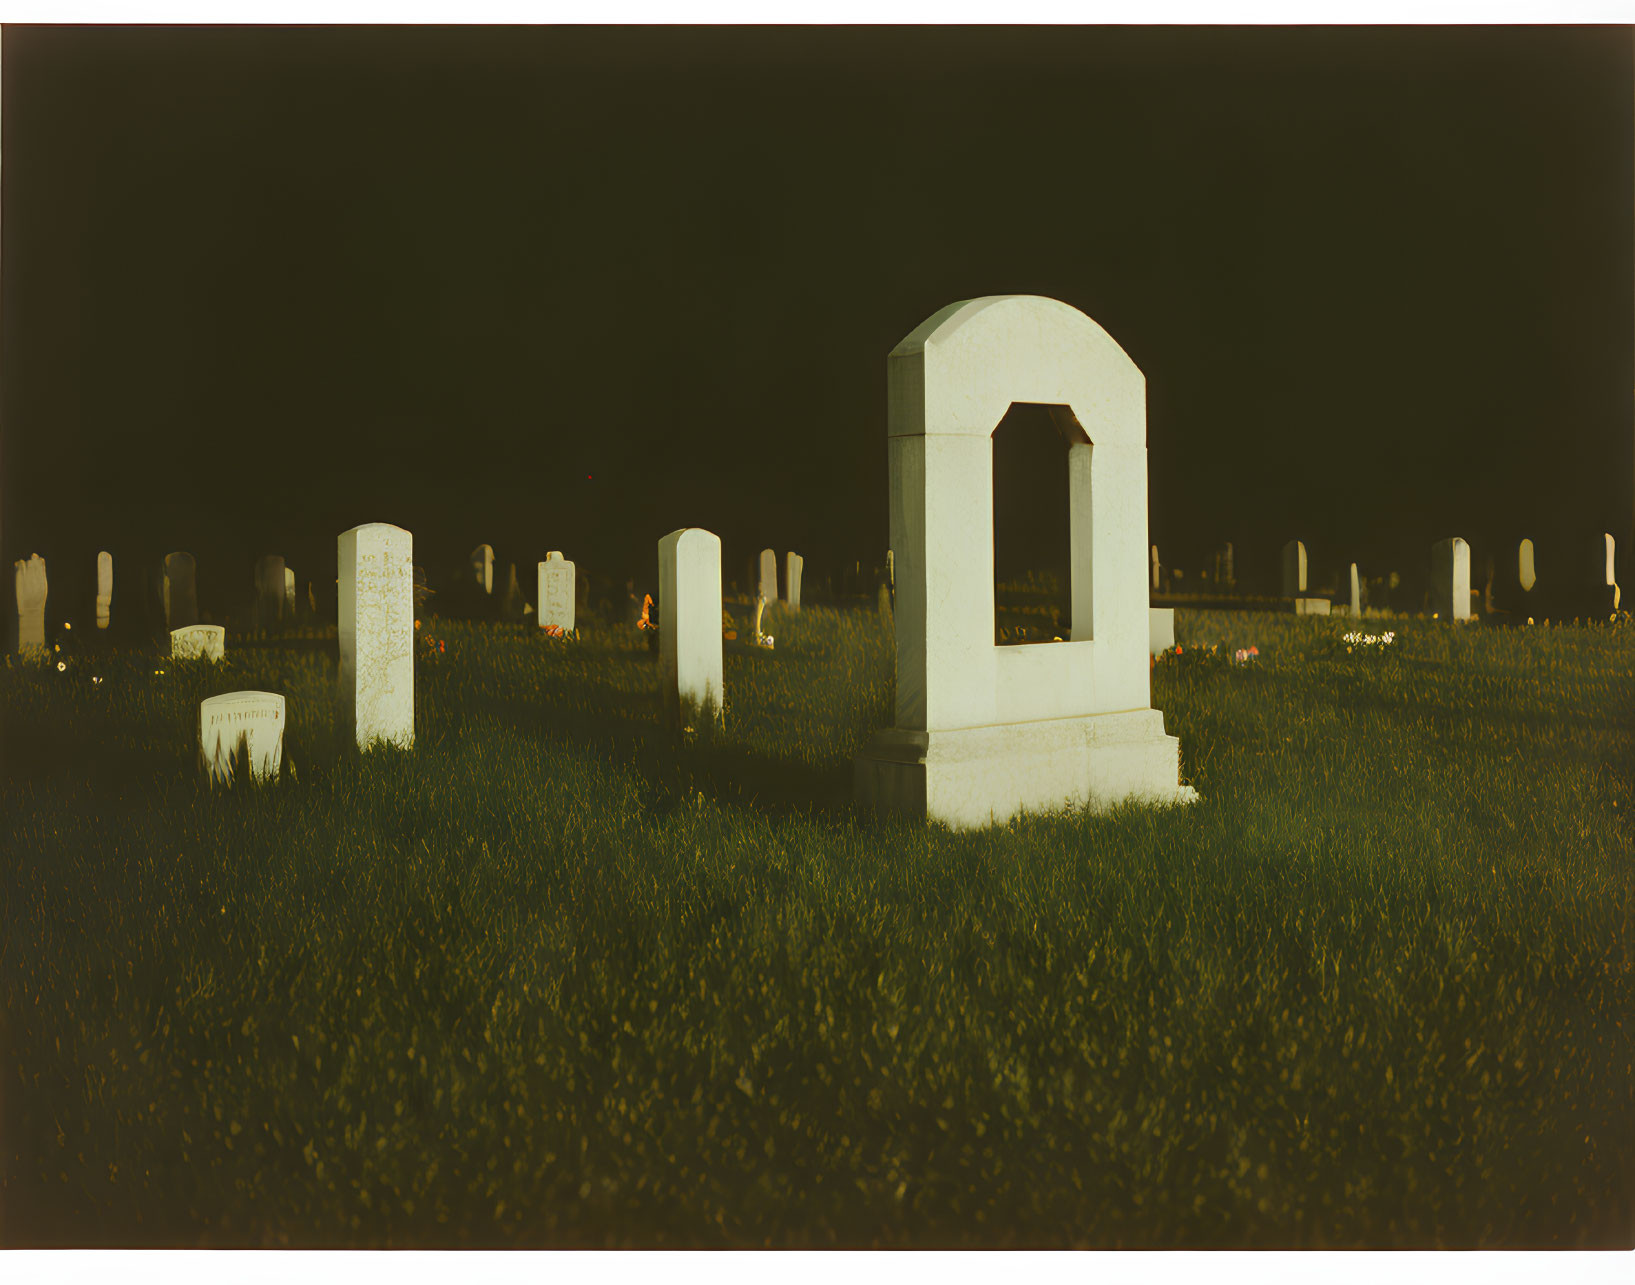 Cemetery Night Scene with Tombstones and Arch-shaped Headstone